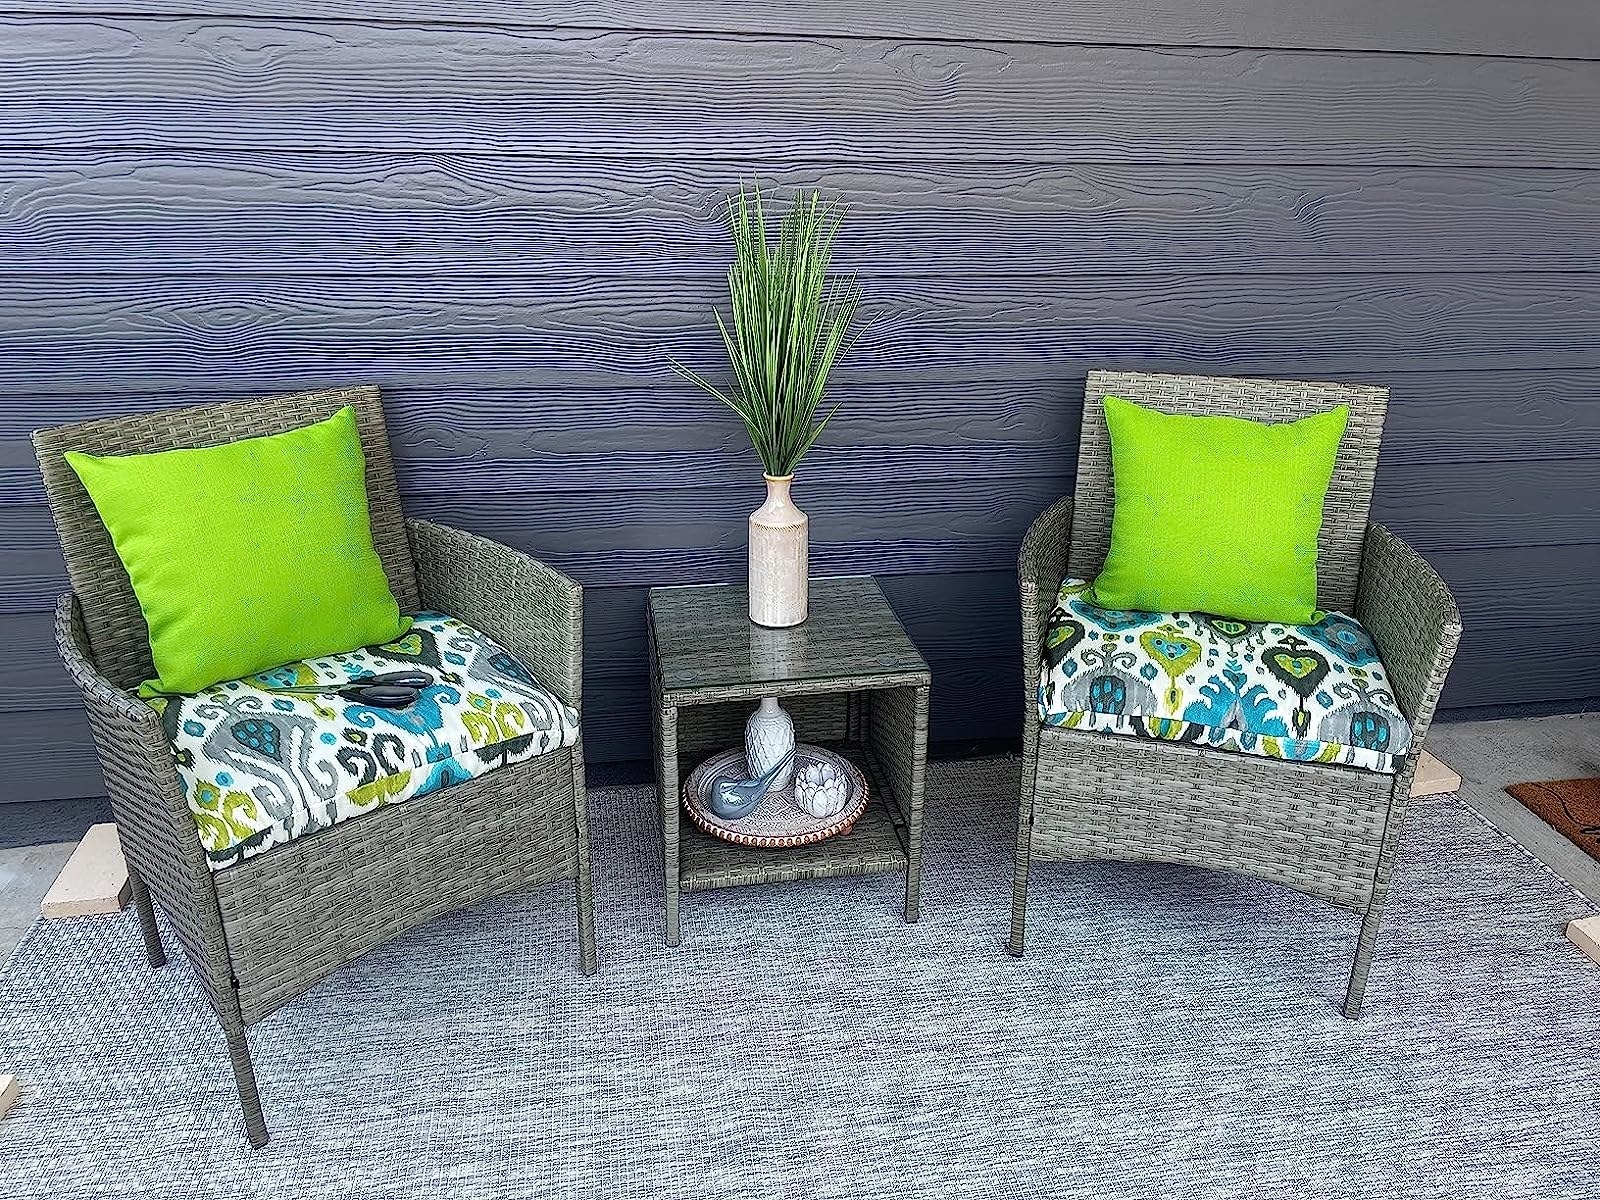 Reviewer image of the two chairs and small side table on their patio with colorful cushions on them